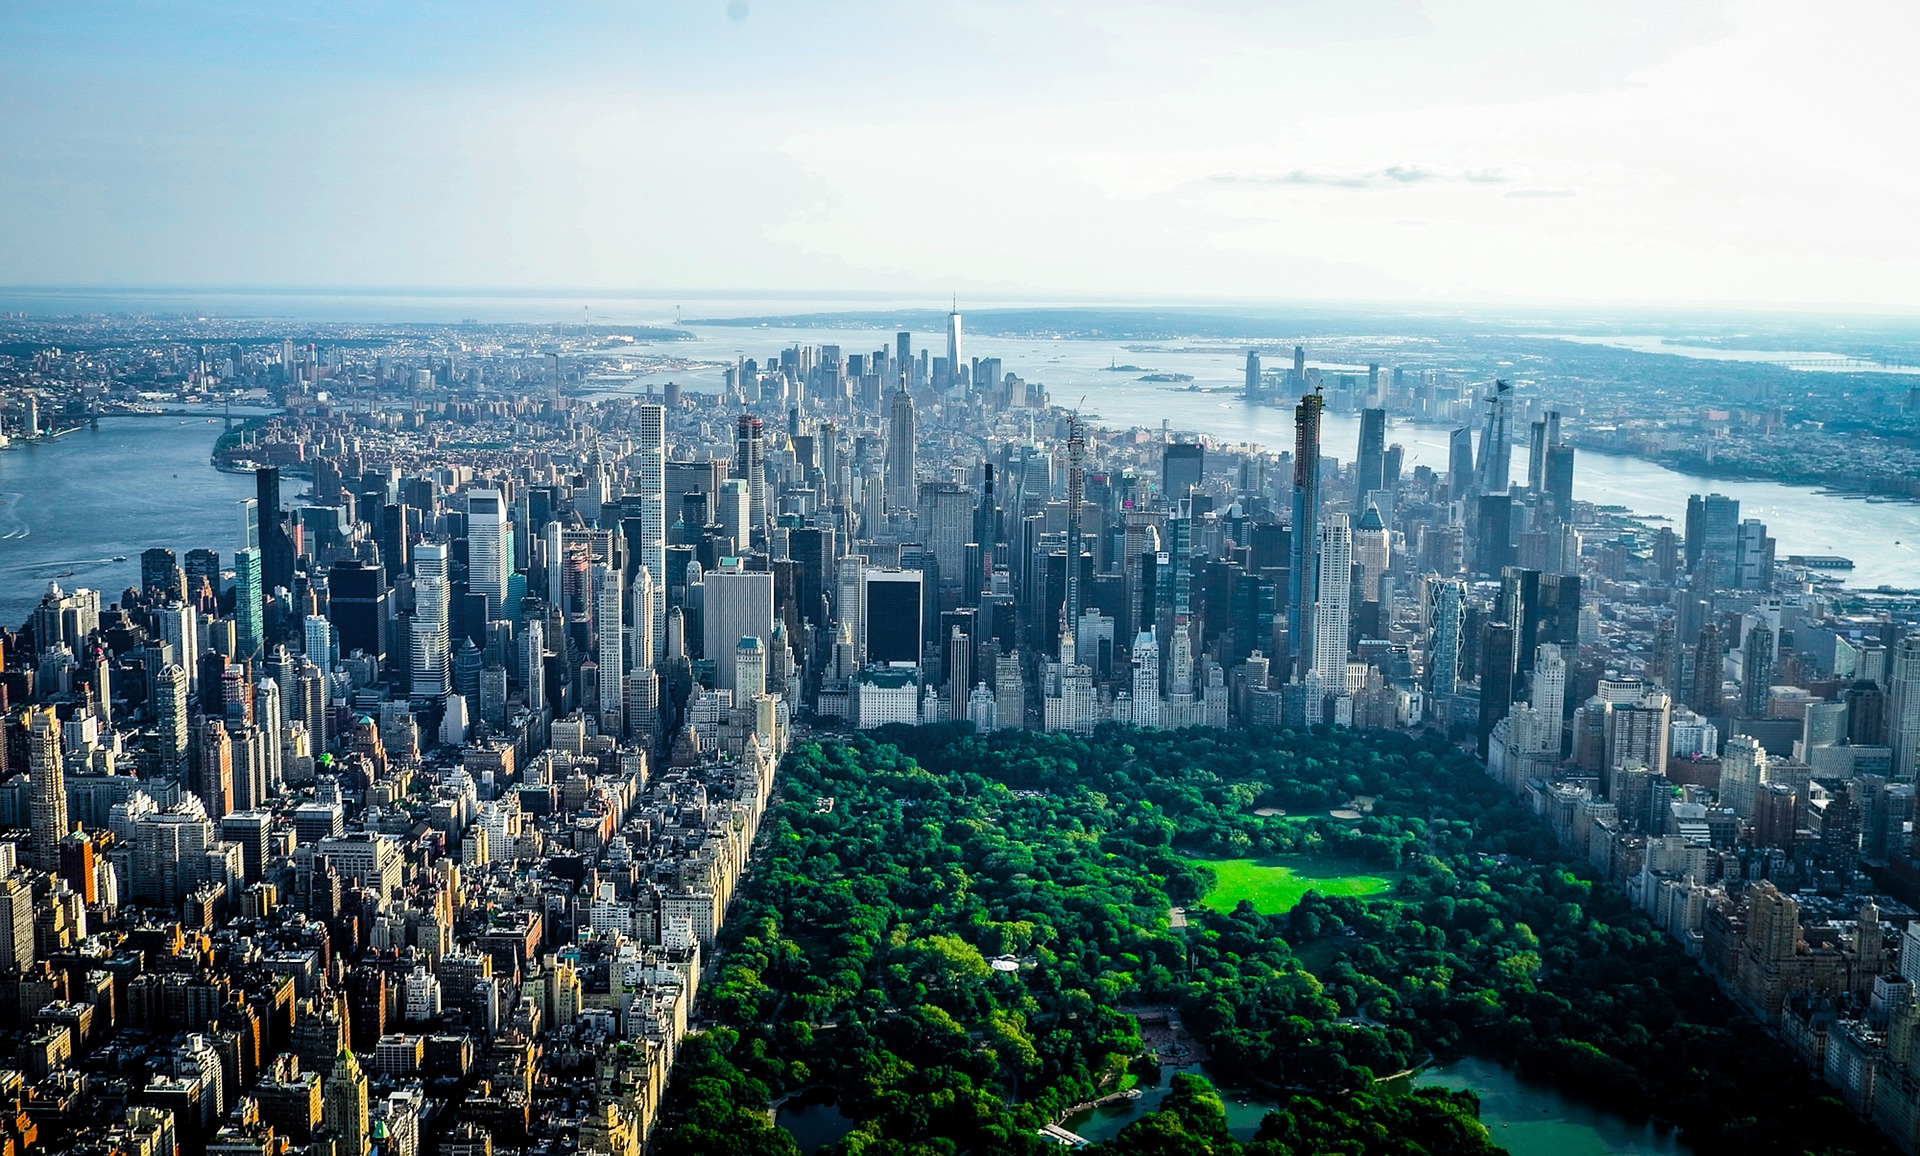 Image by Leonhard Niederwimmer from Pixabay, New York’s office to residential conversion program draws interest from 64 owners